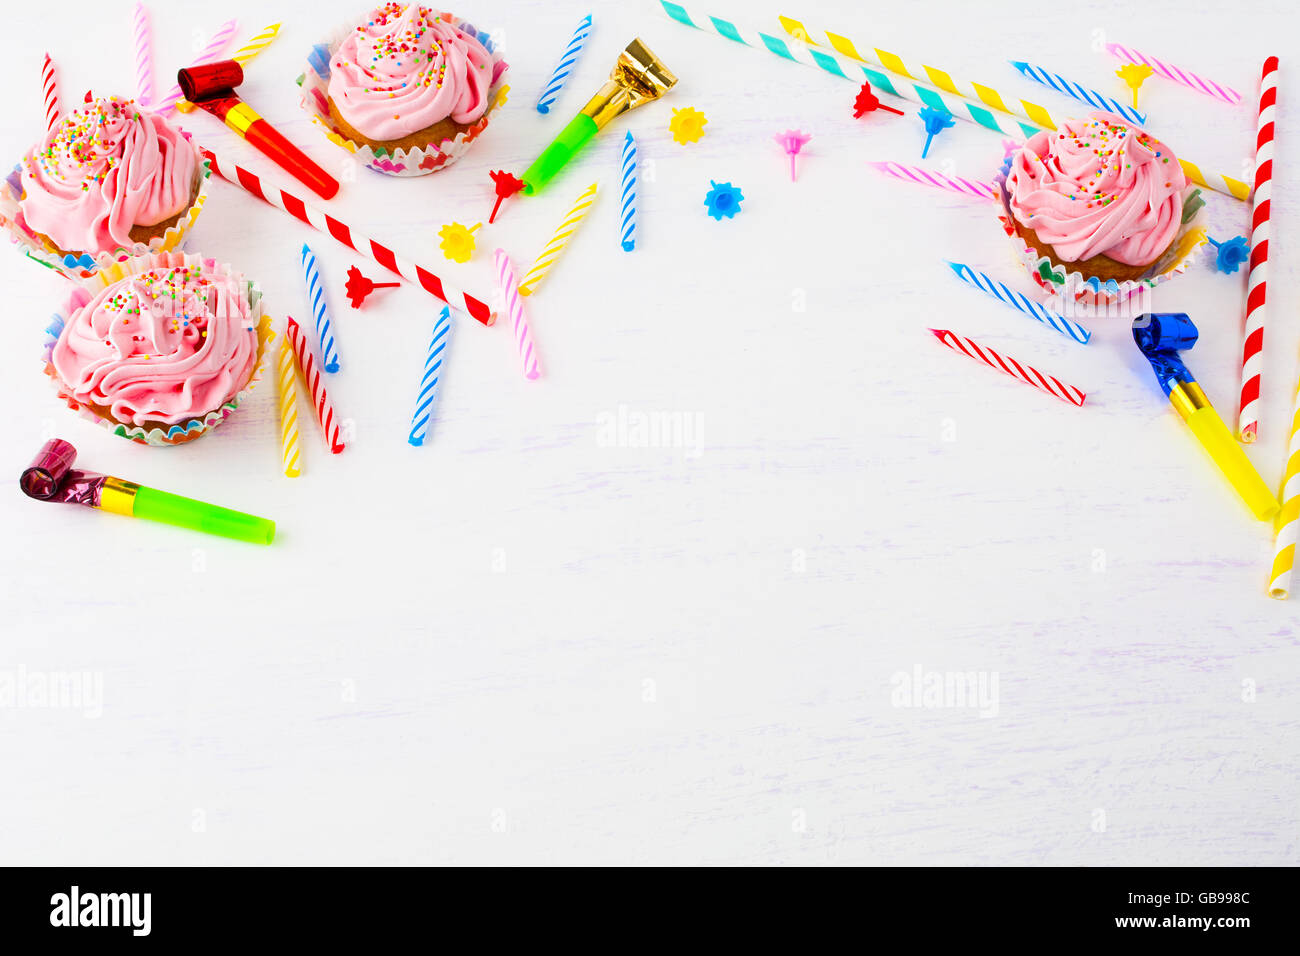 Birthday background with pink cupcakes and candles. Birthday cupcakes. Gourmet cupcakes. Sweet dessert. Sweet pastry. Stock Photo